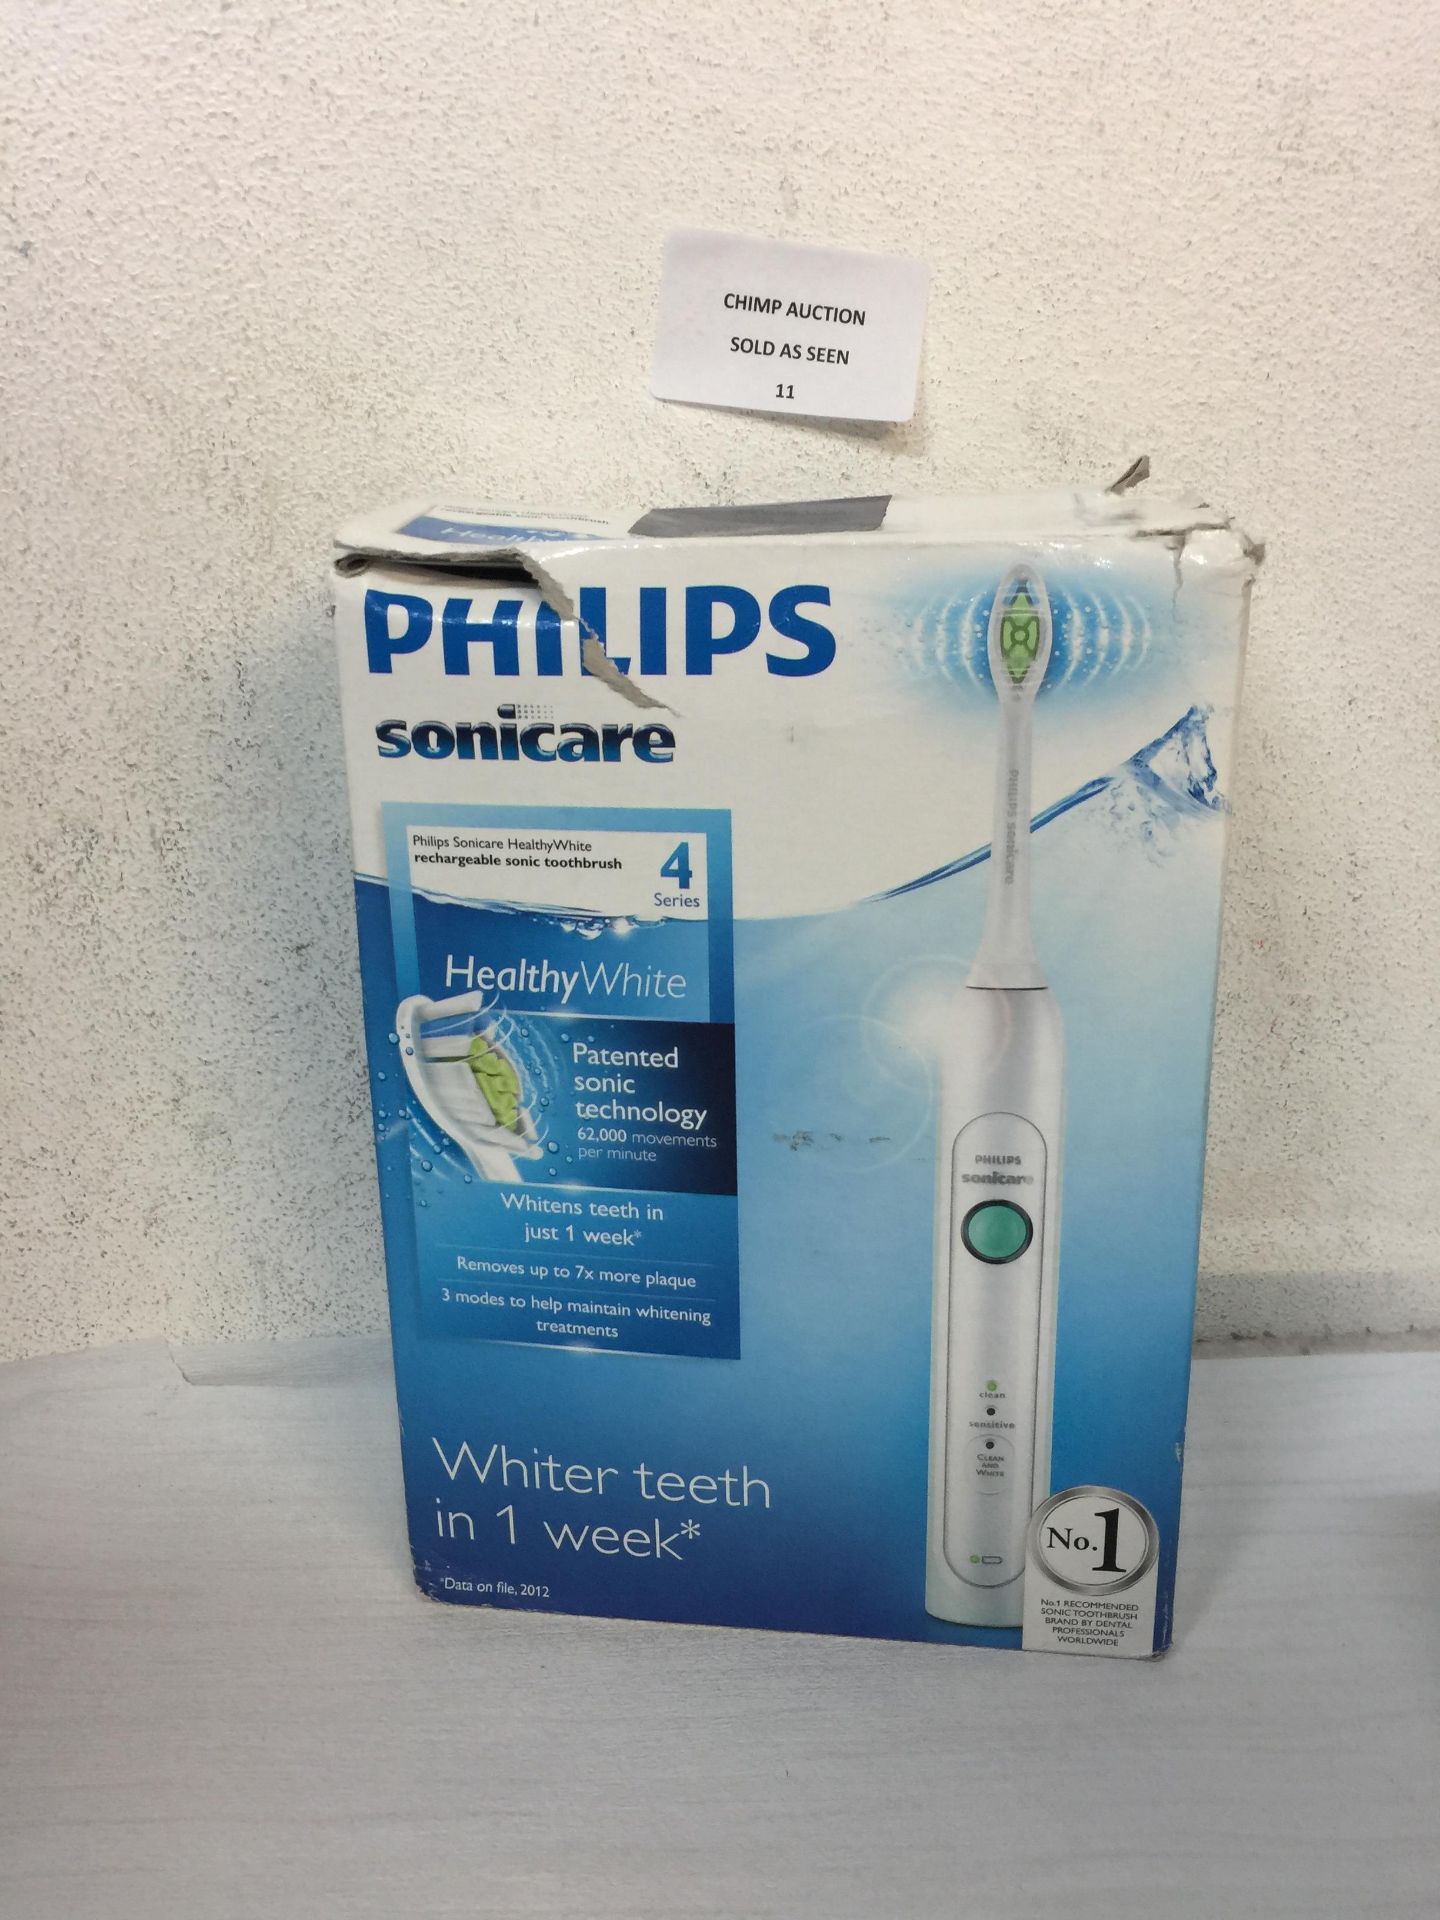 PHILIPS SONICARE HEALTHY WHITE SERIES 4 ELECTRIC TOOTHBRUSH